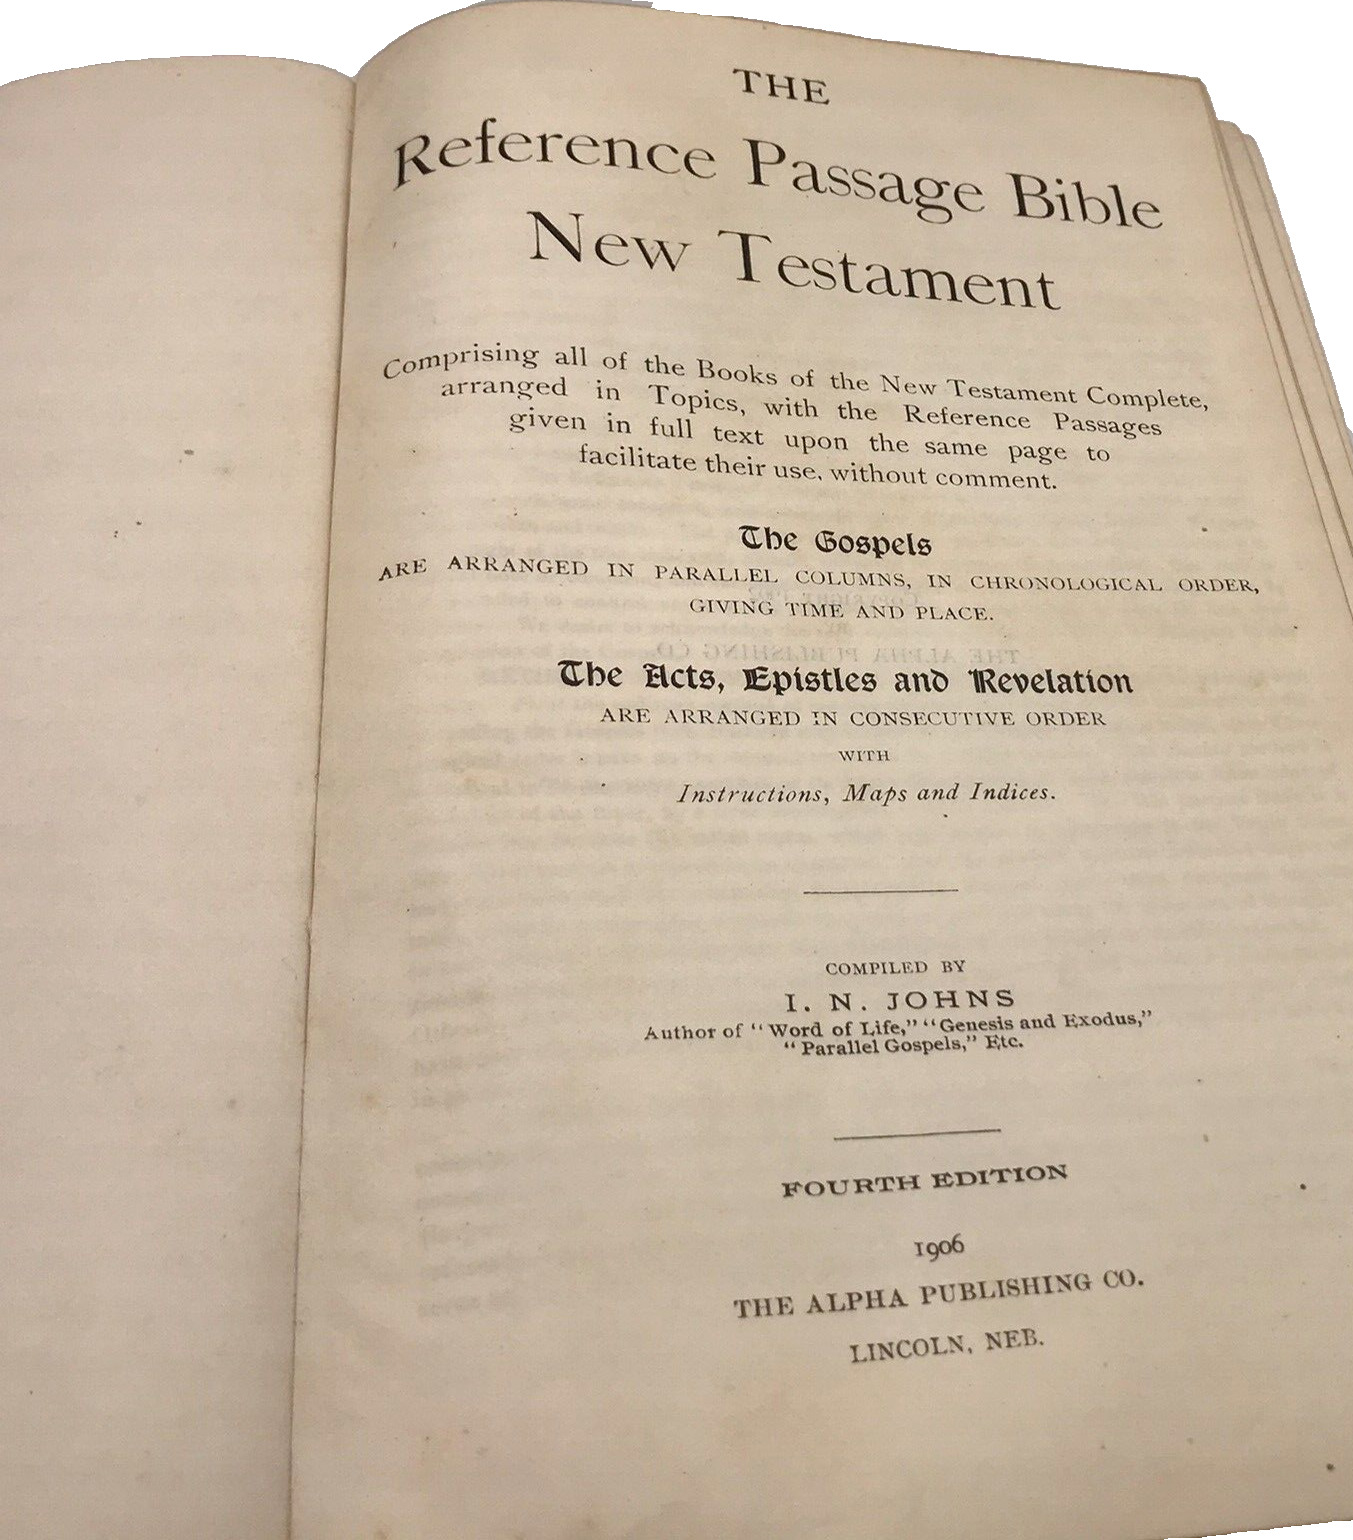 The Reference Passage Bible New Testament Antique 4th Edition 1906 Hardcover